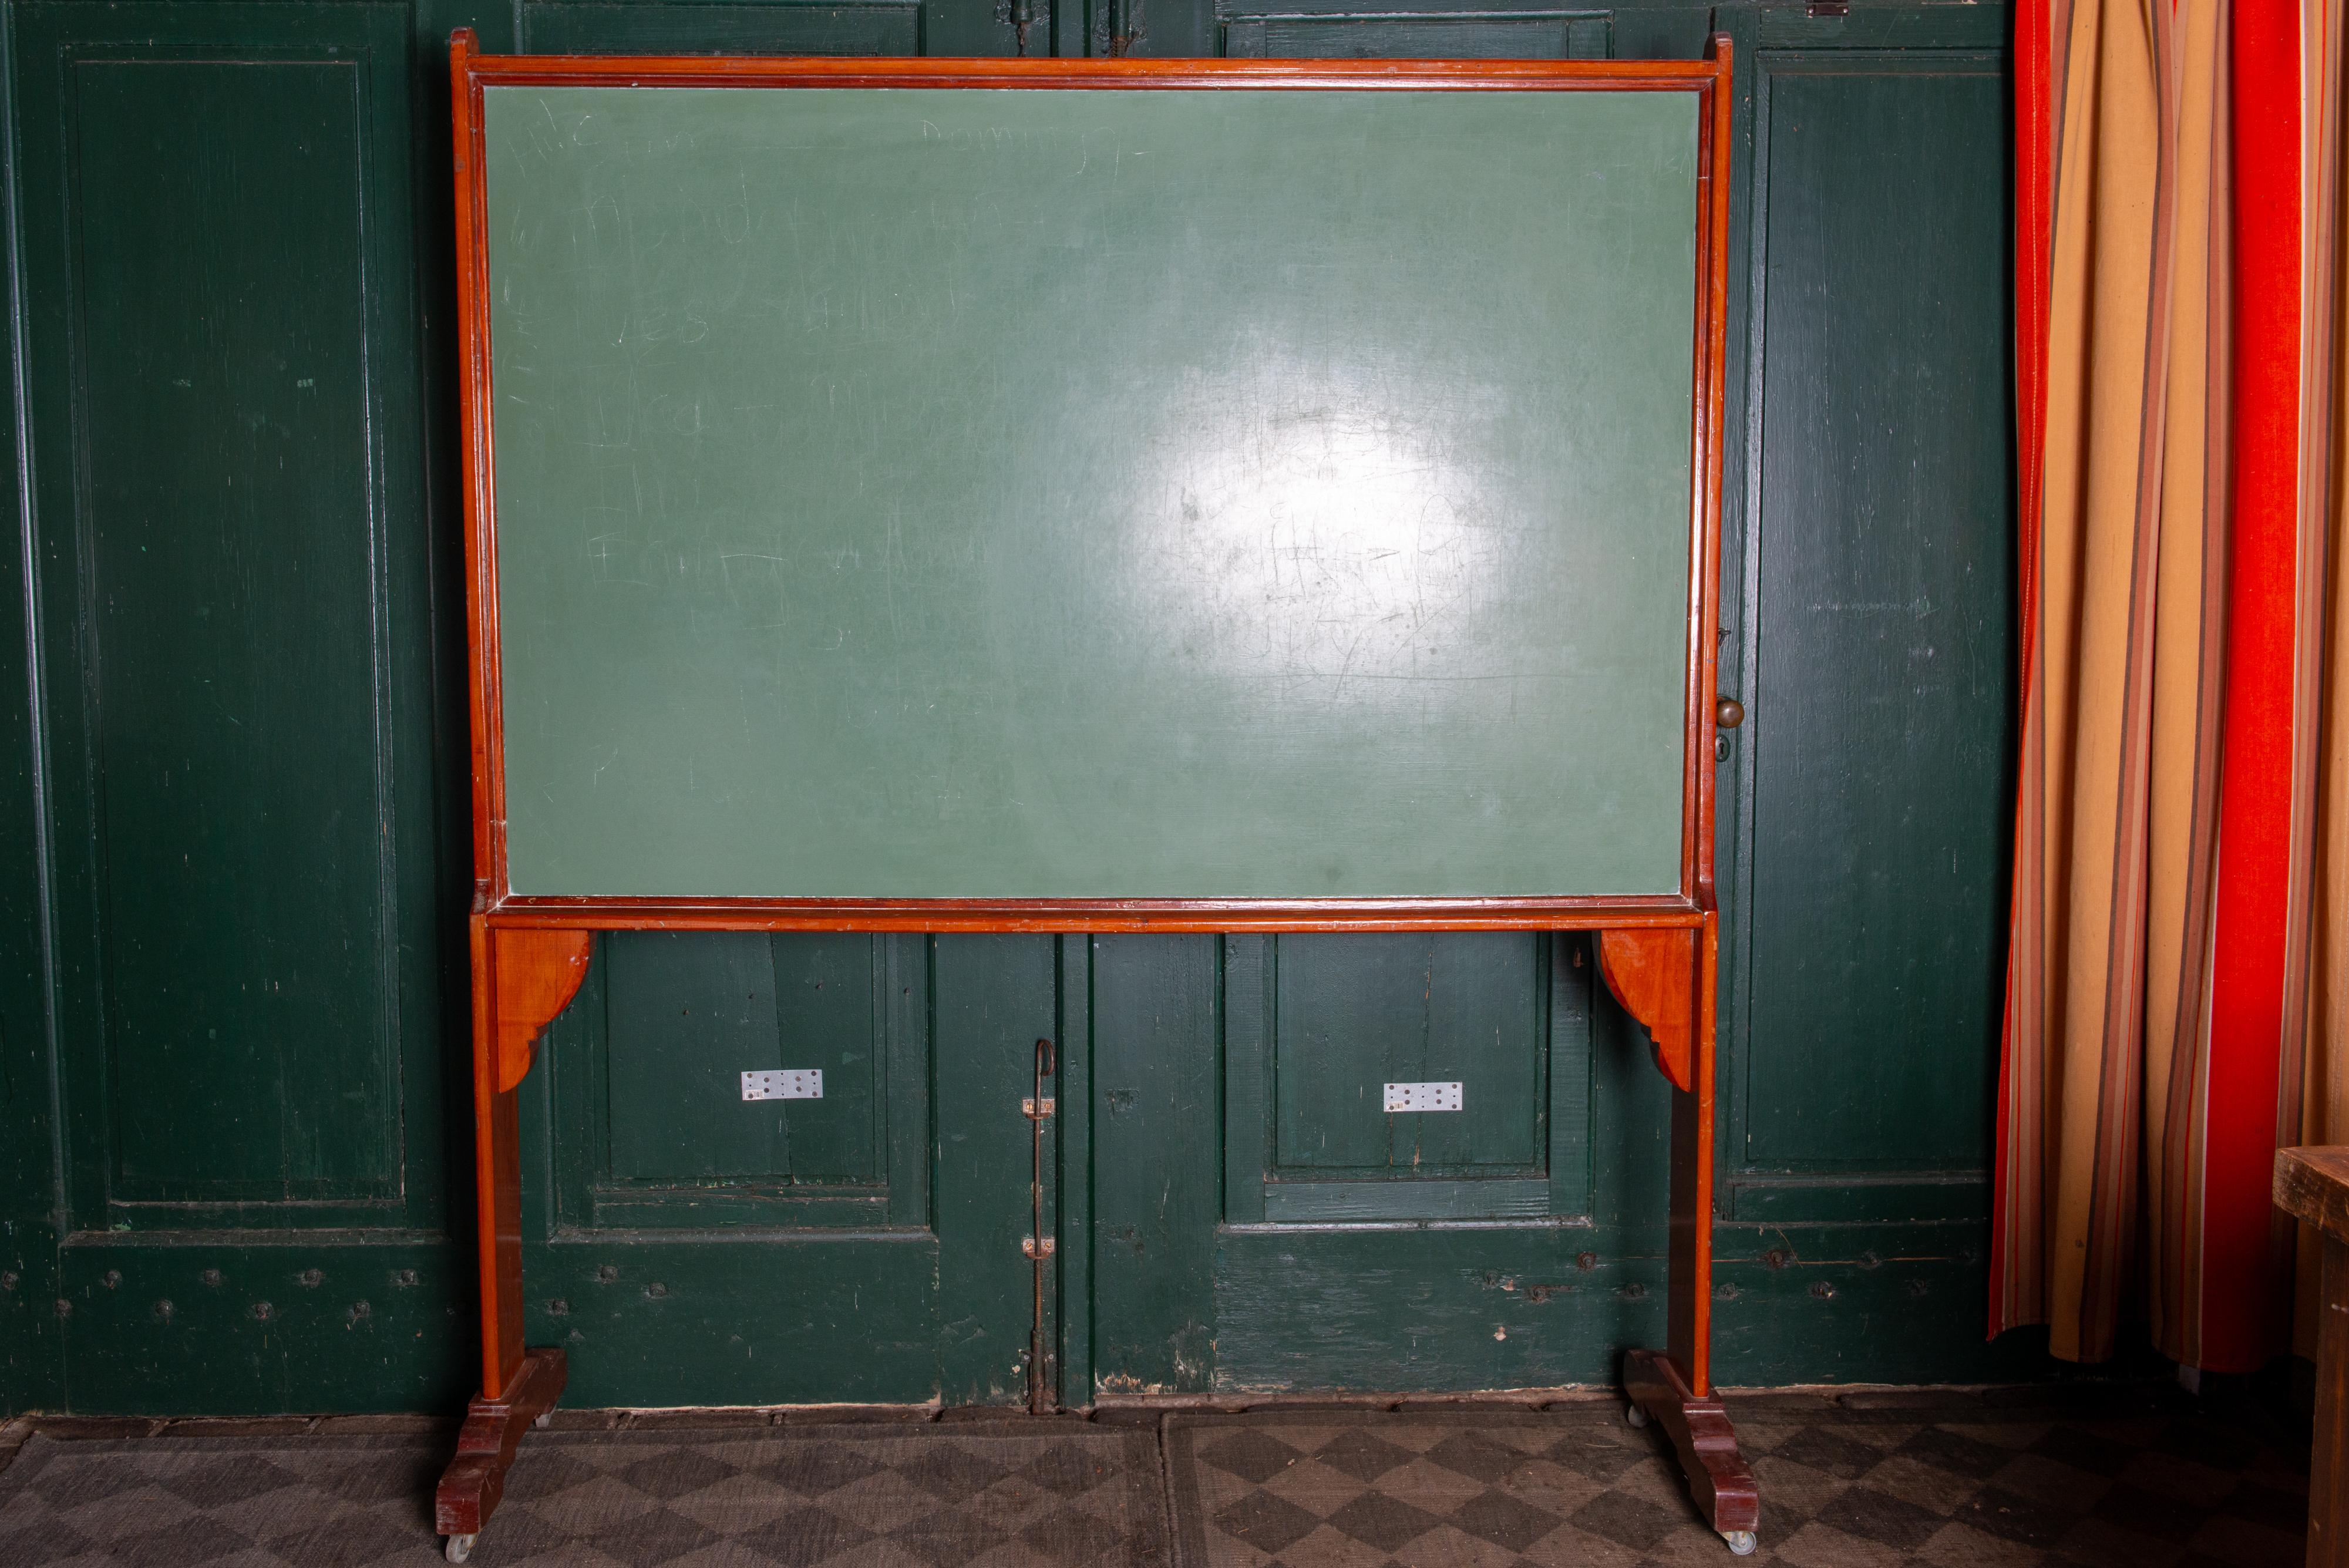 A very large 1900-1910 century chalk board from the Netherlands. The solid wood stand is substantial and easy to move on its antique casters. Great in a kid's room, a restaurant, or a store. Use your imagination.